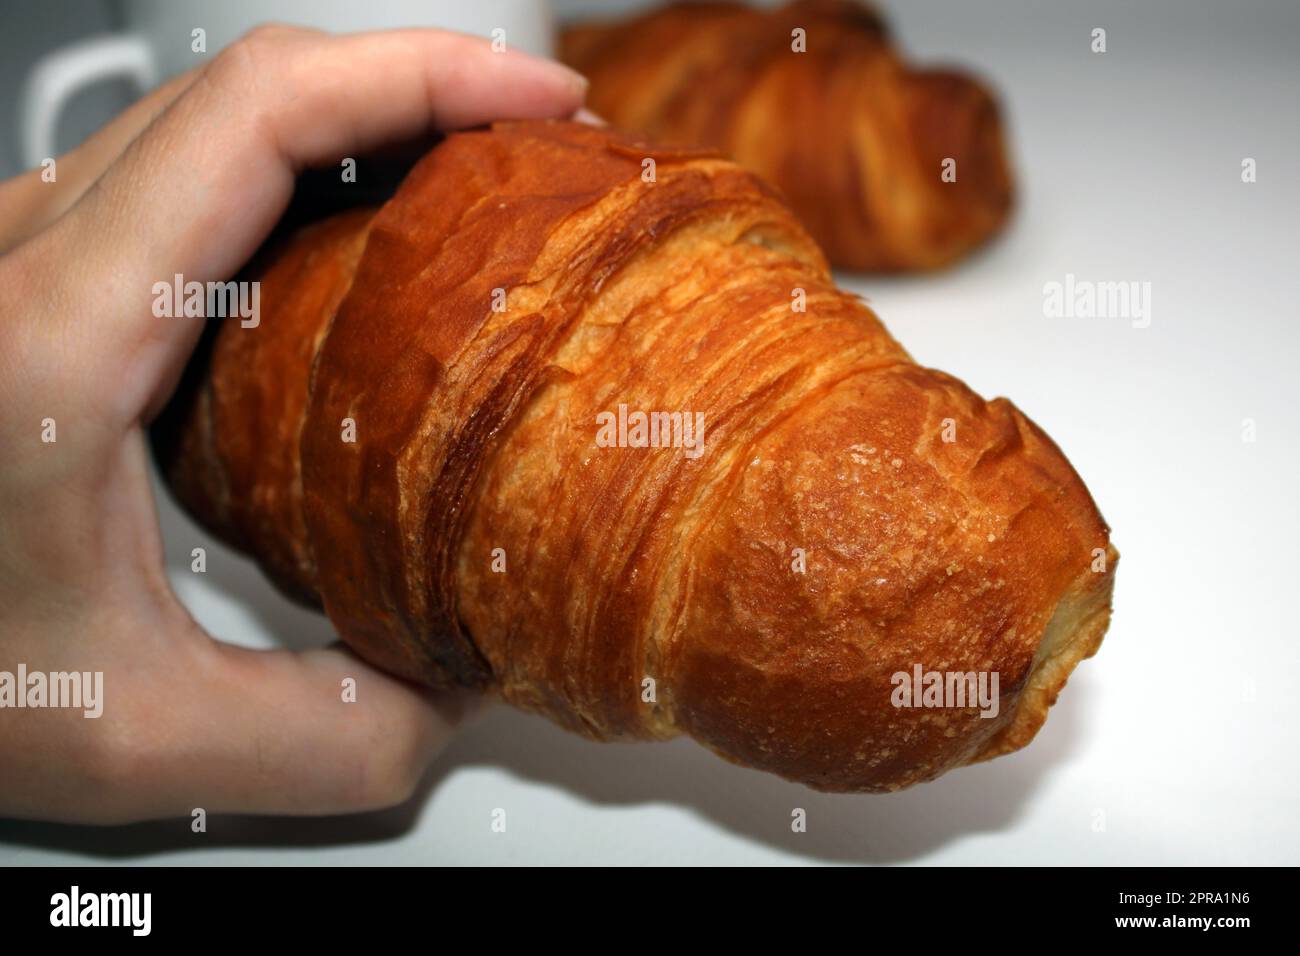 Fresh crispy croissant close-up in hand. Blurred light background. Cooking, home baking Stock Photo